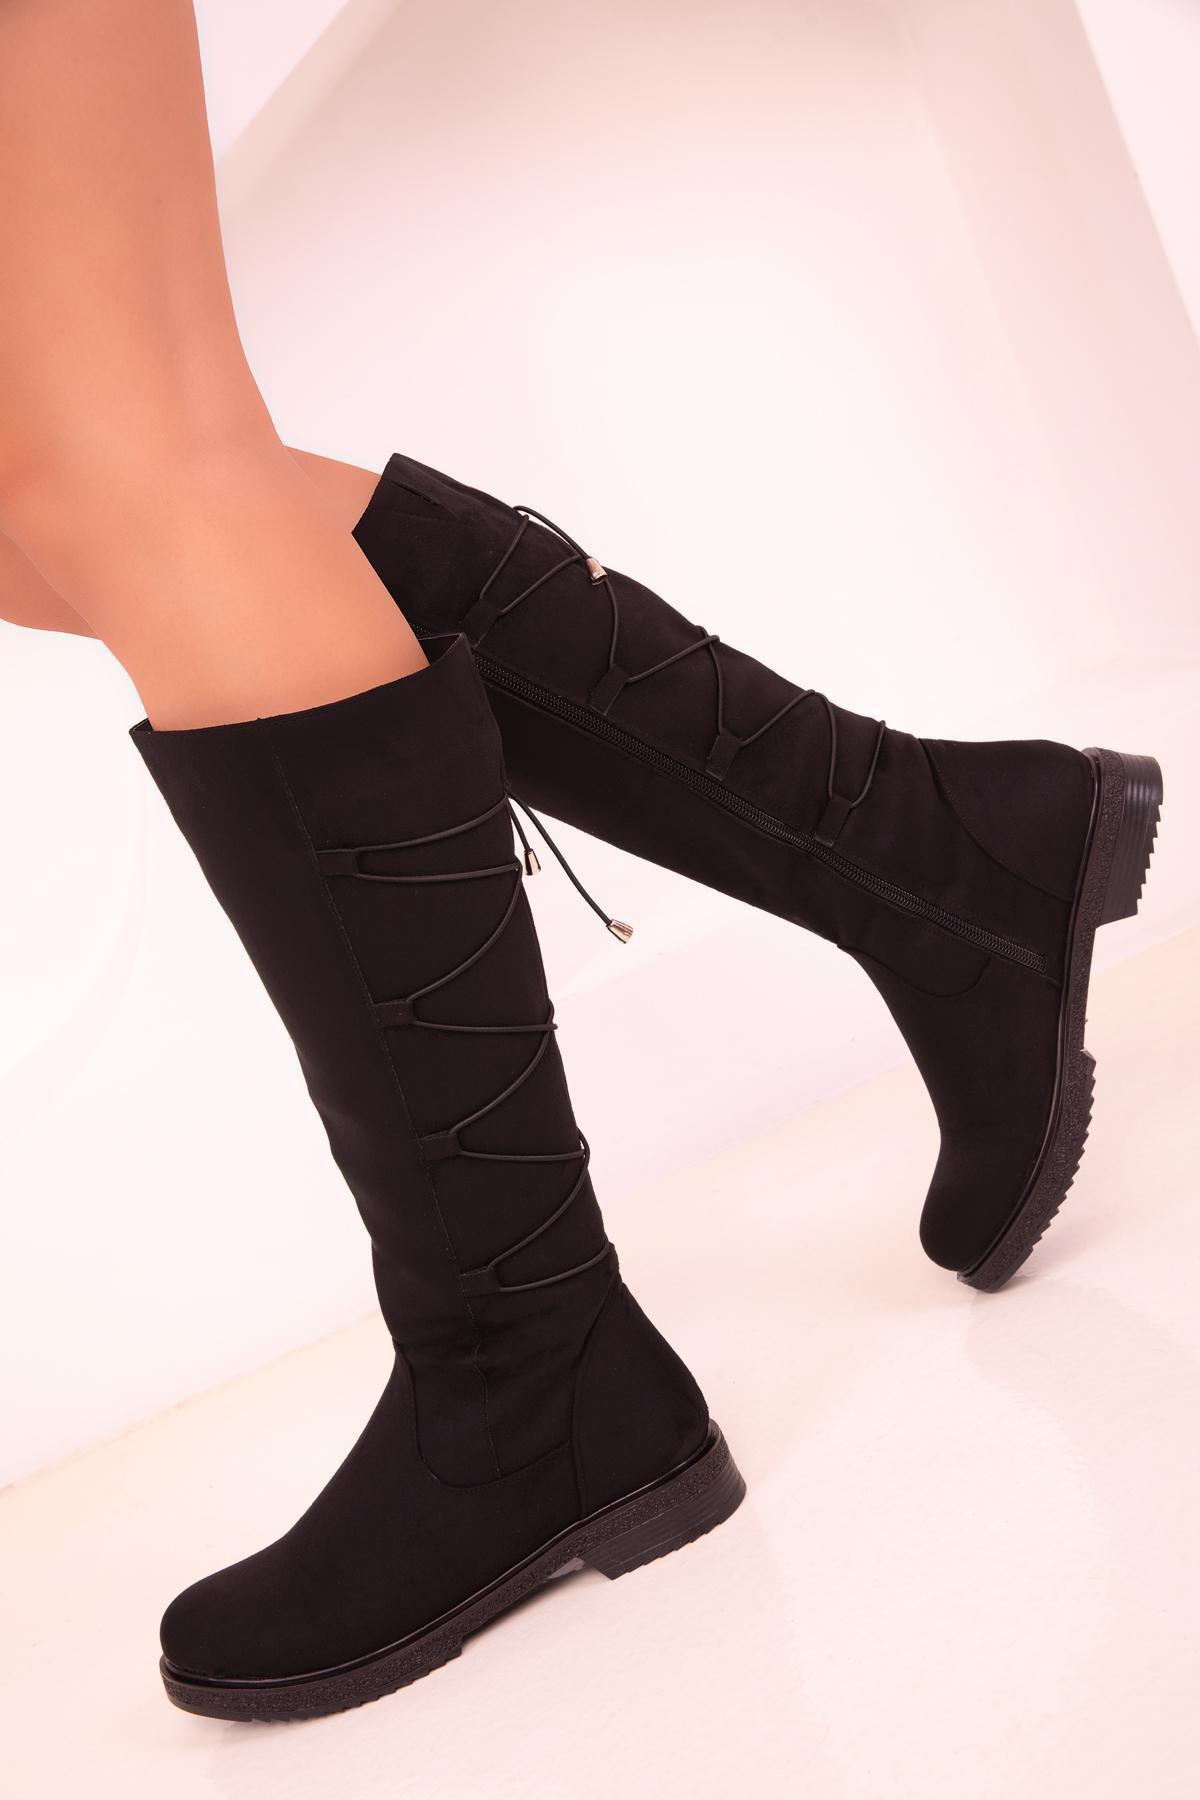 SOHO - Black Suede Zippered Boots